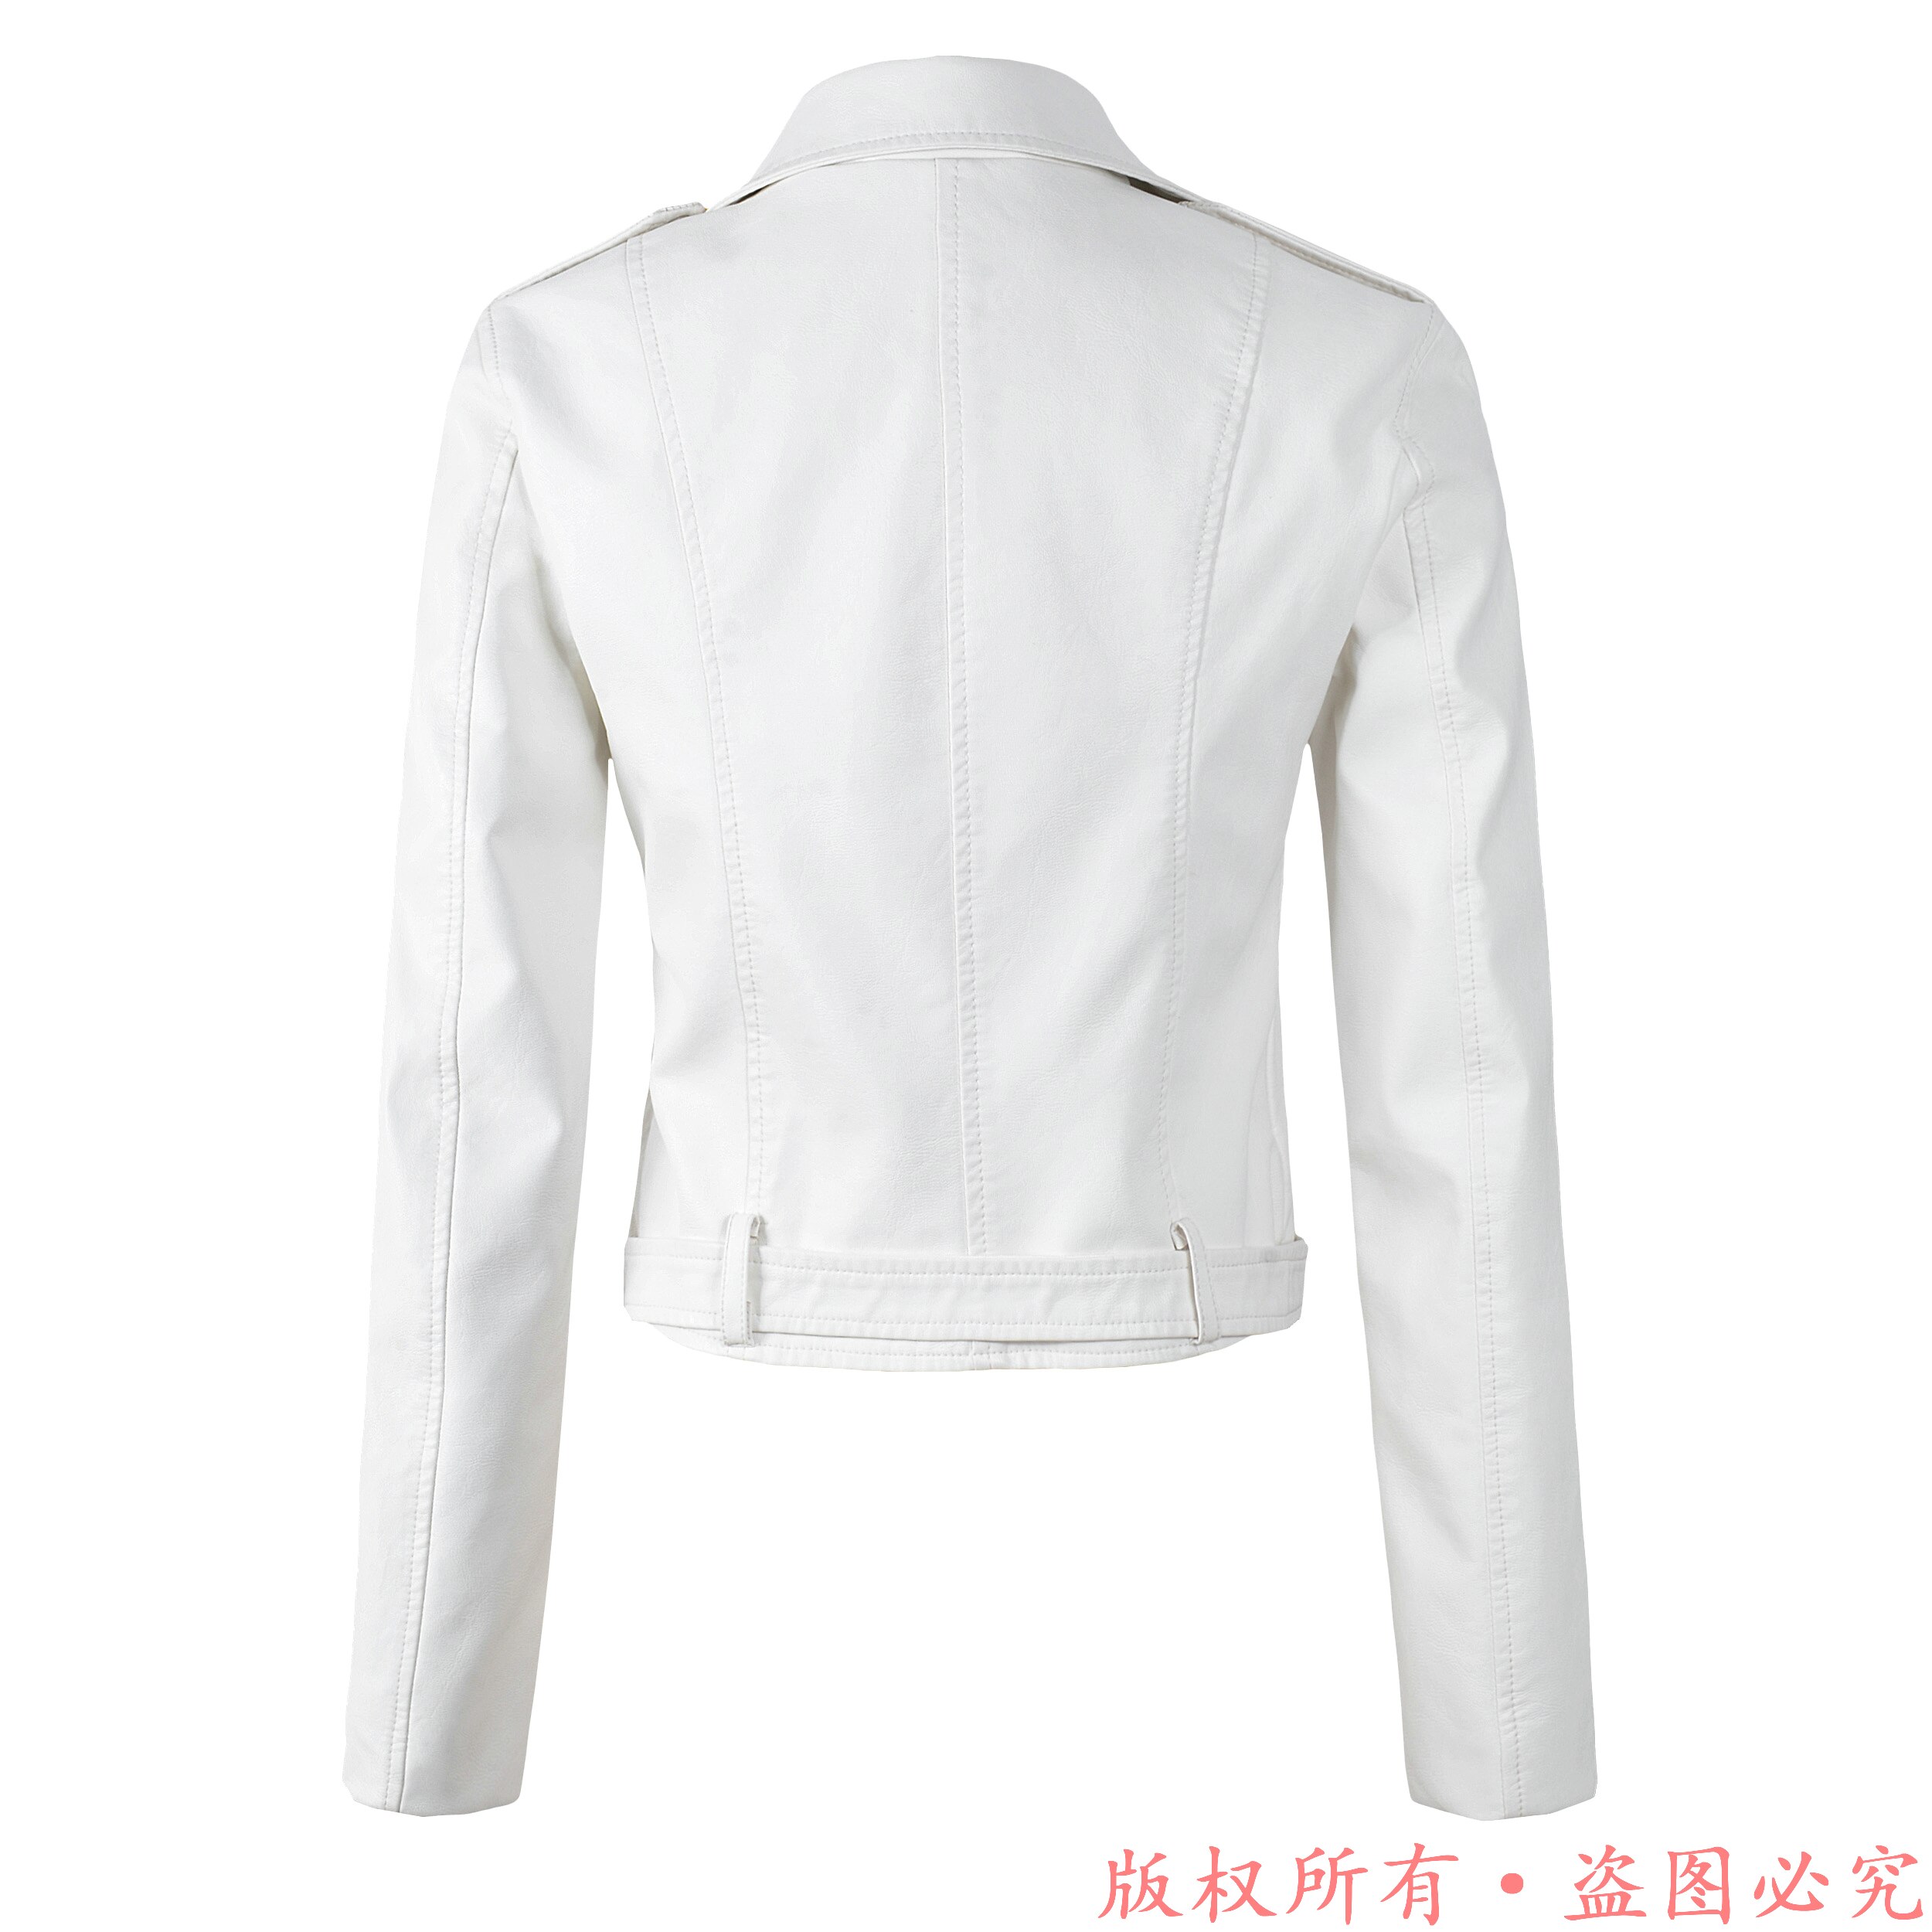 New Arrival 2020 brand Winter Autumn Motorcycle leather jackets White leather jacket women leather coat slim PU jacket Leather